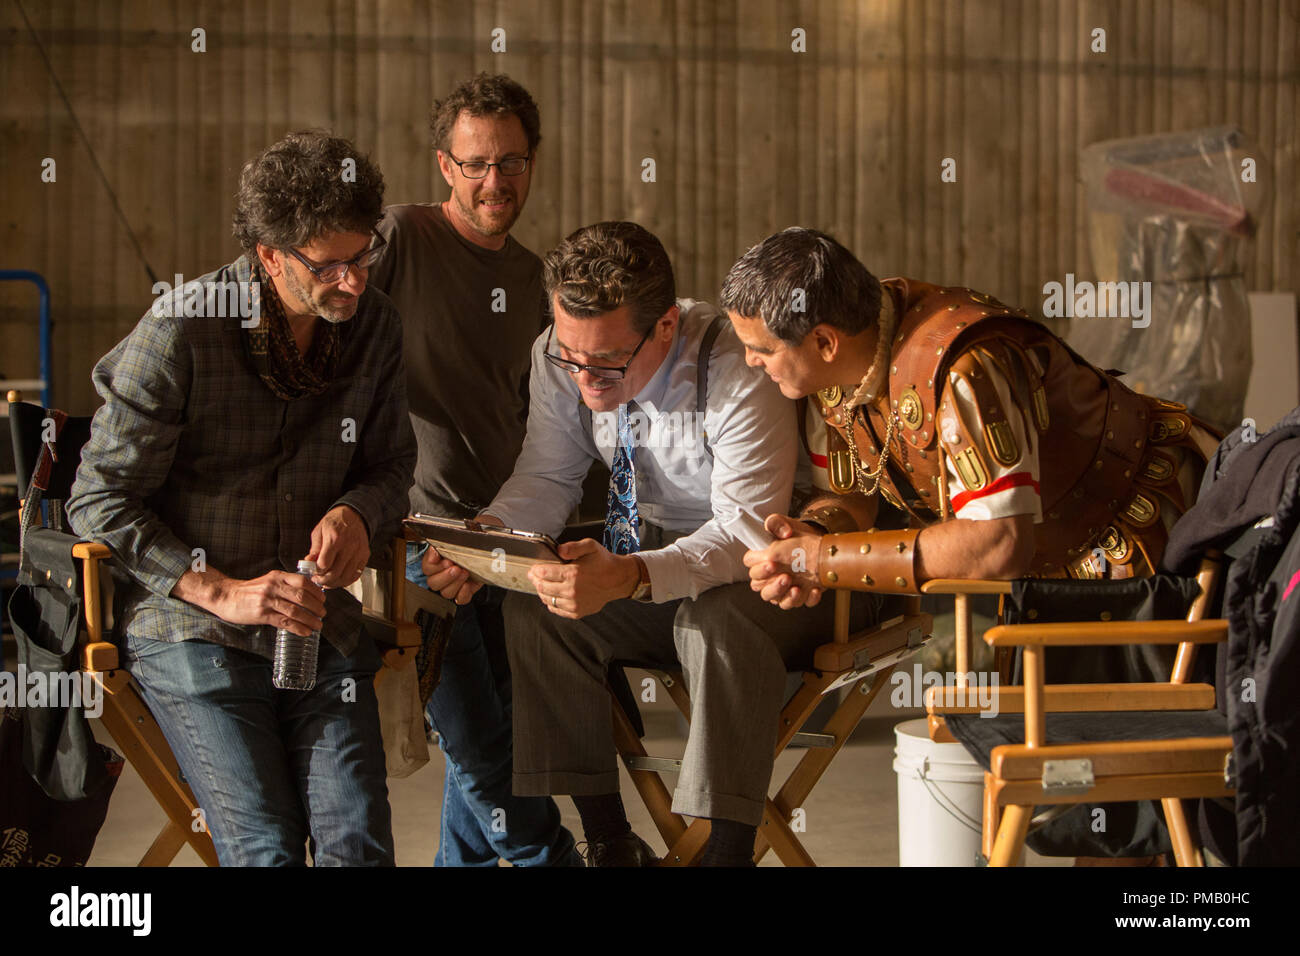 (L to R) Four-time Oscar®-winning filmmakers JOEL COEN and ETHAN COEN are joined by JOSH BROLIN as Eddie Mannix and GEORGE CLOONEY as Baird Whitlock on the set of 'Hail, Caesar!' Stock Photo